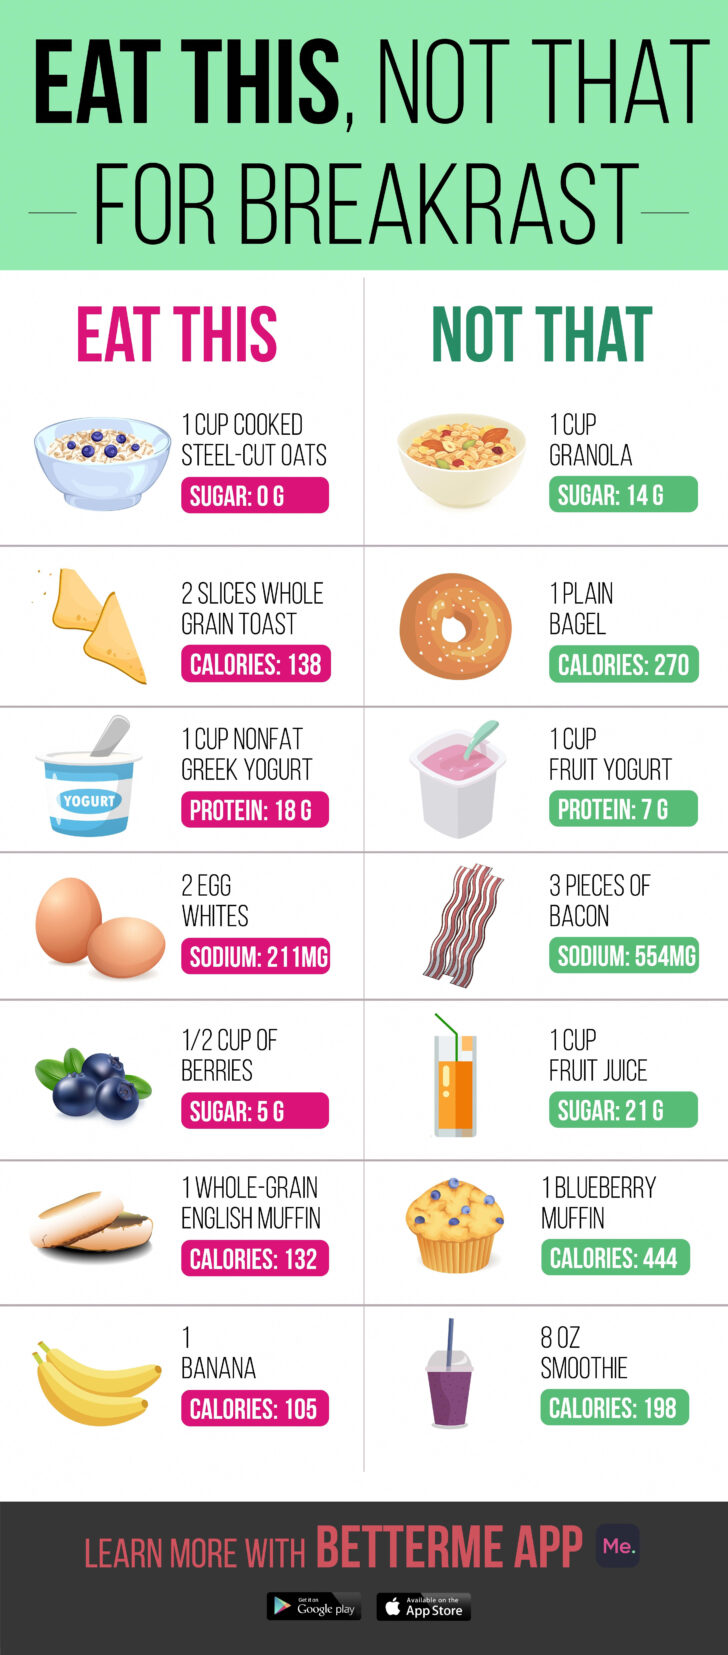 Protein Diet Plan For Weight Loss